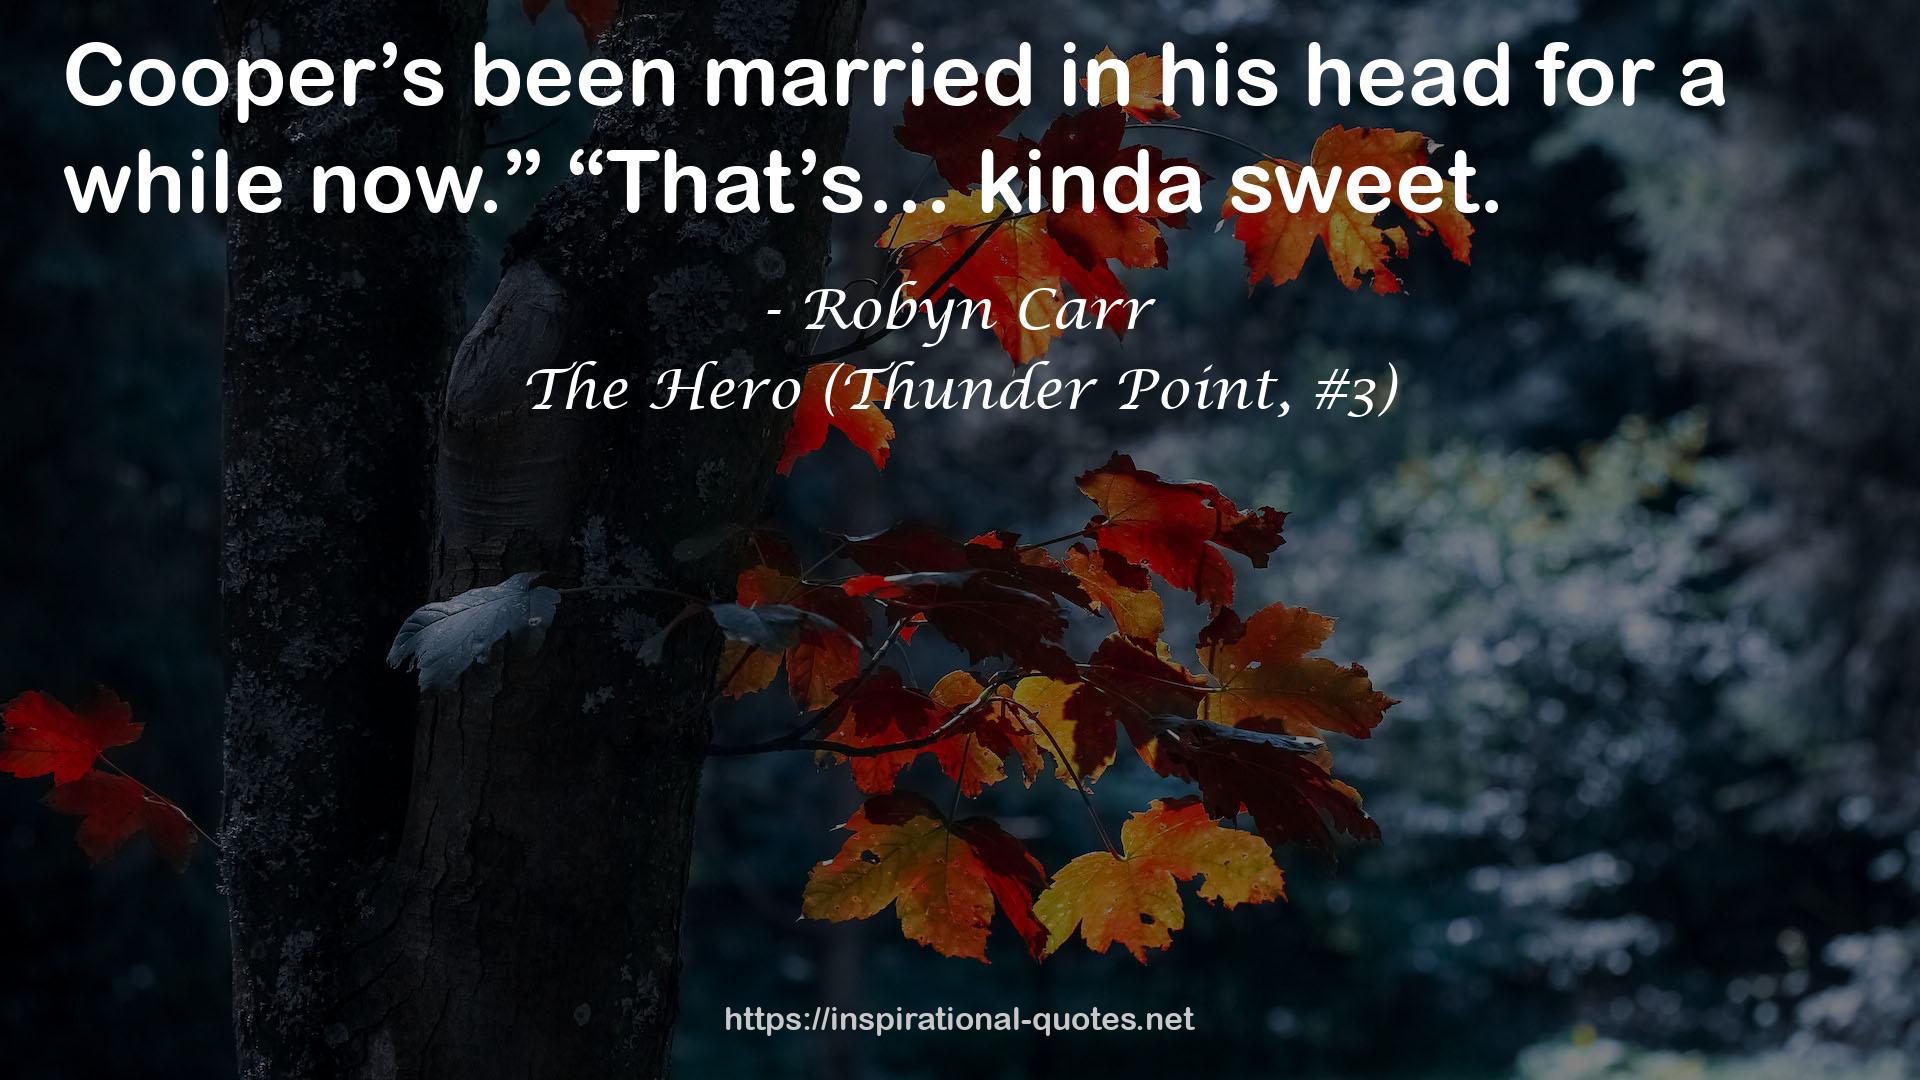 The Hero (Thunder Point, #3) QUOTES